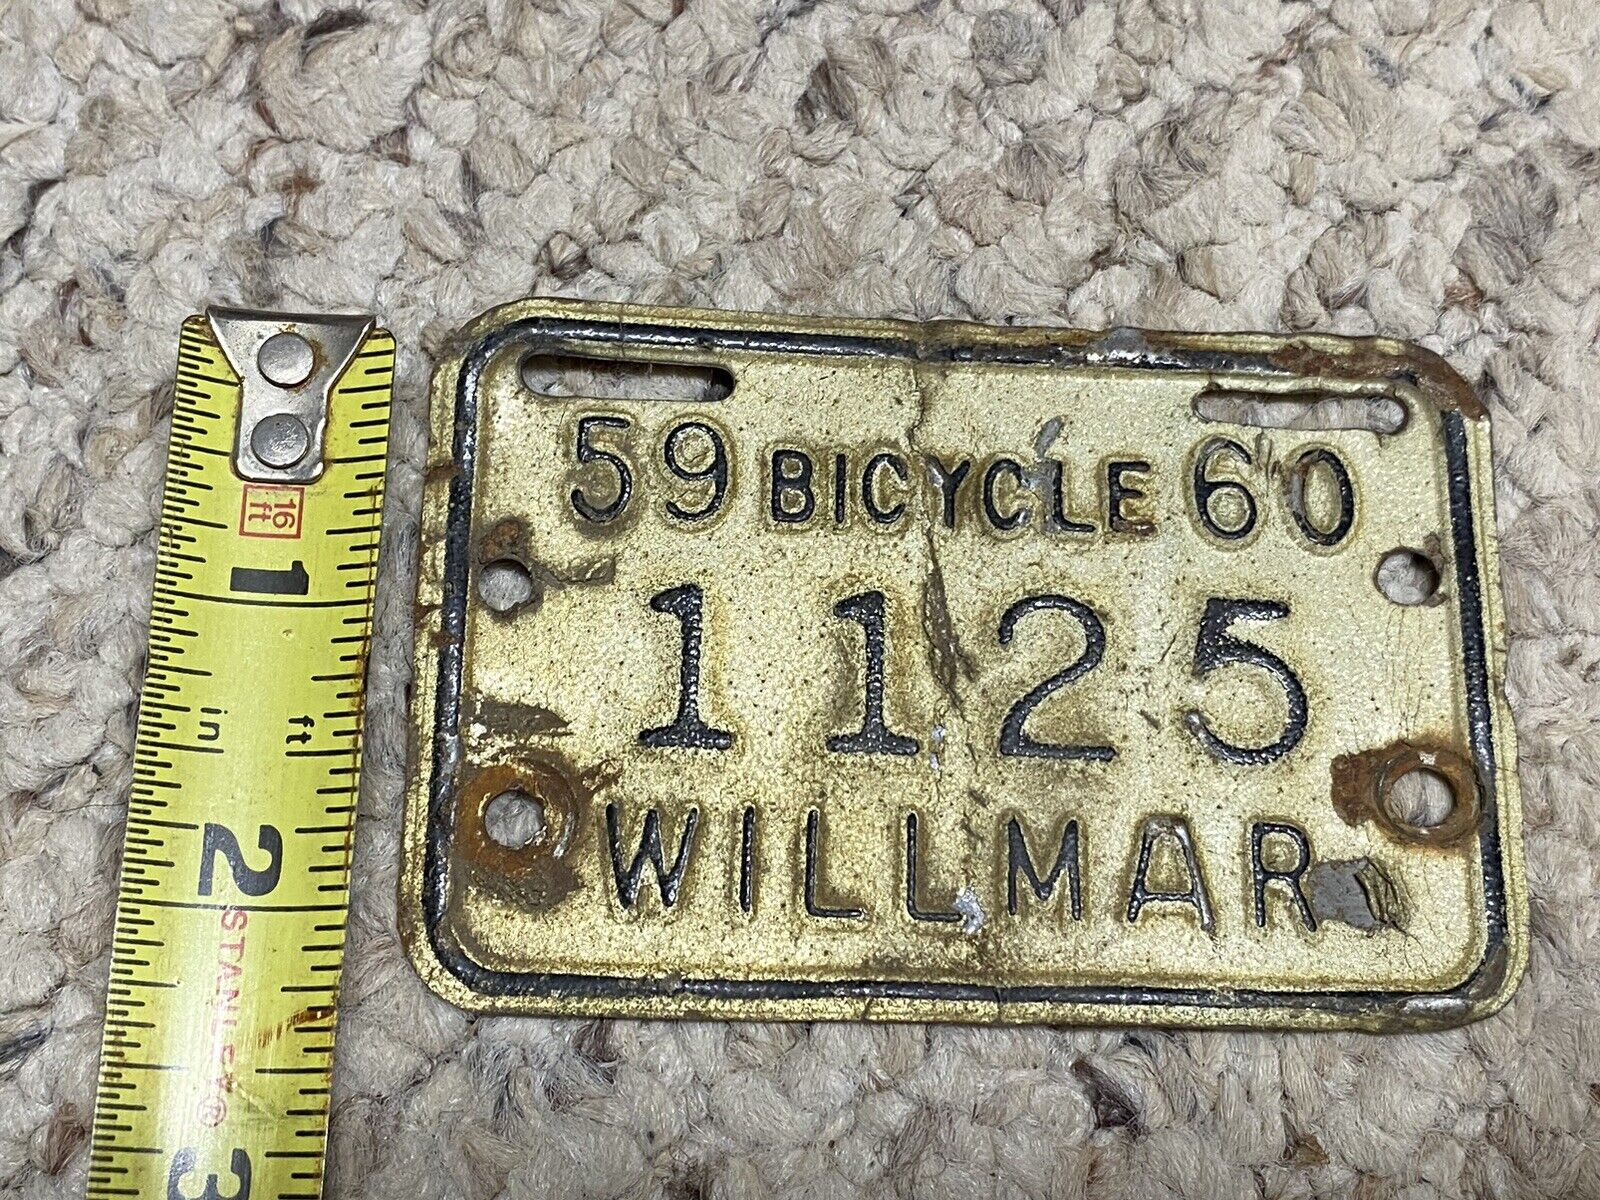 1959 1960 Bicycle License Plate Willmar